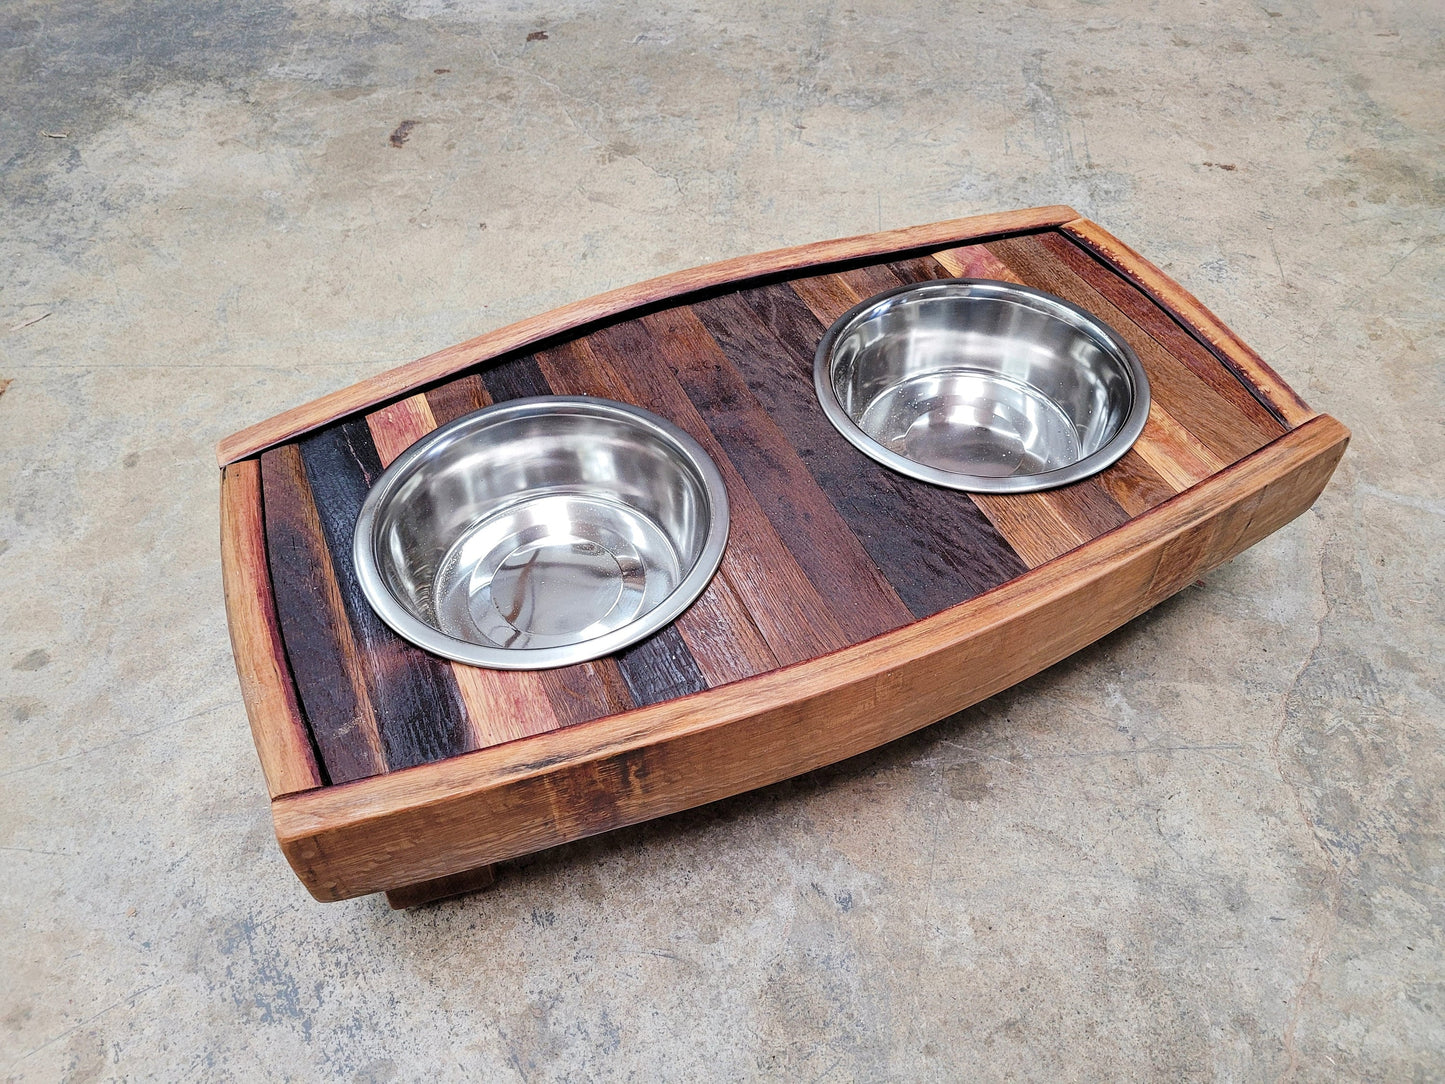 Elevated Wine Barrel Pet Feeder - Pardalis - Made from retired California wine barrels. 100% Recycled!